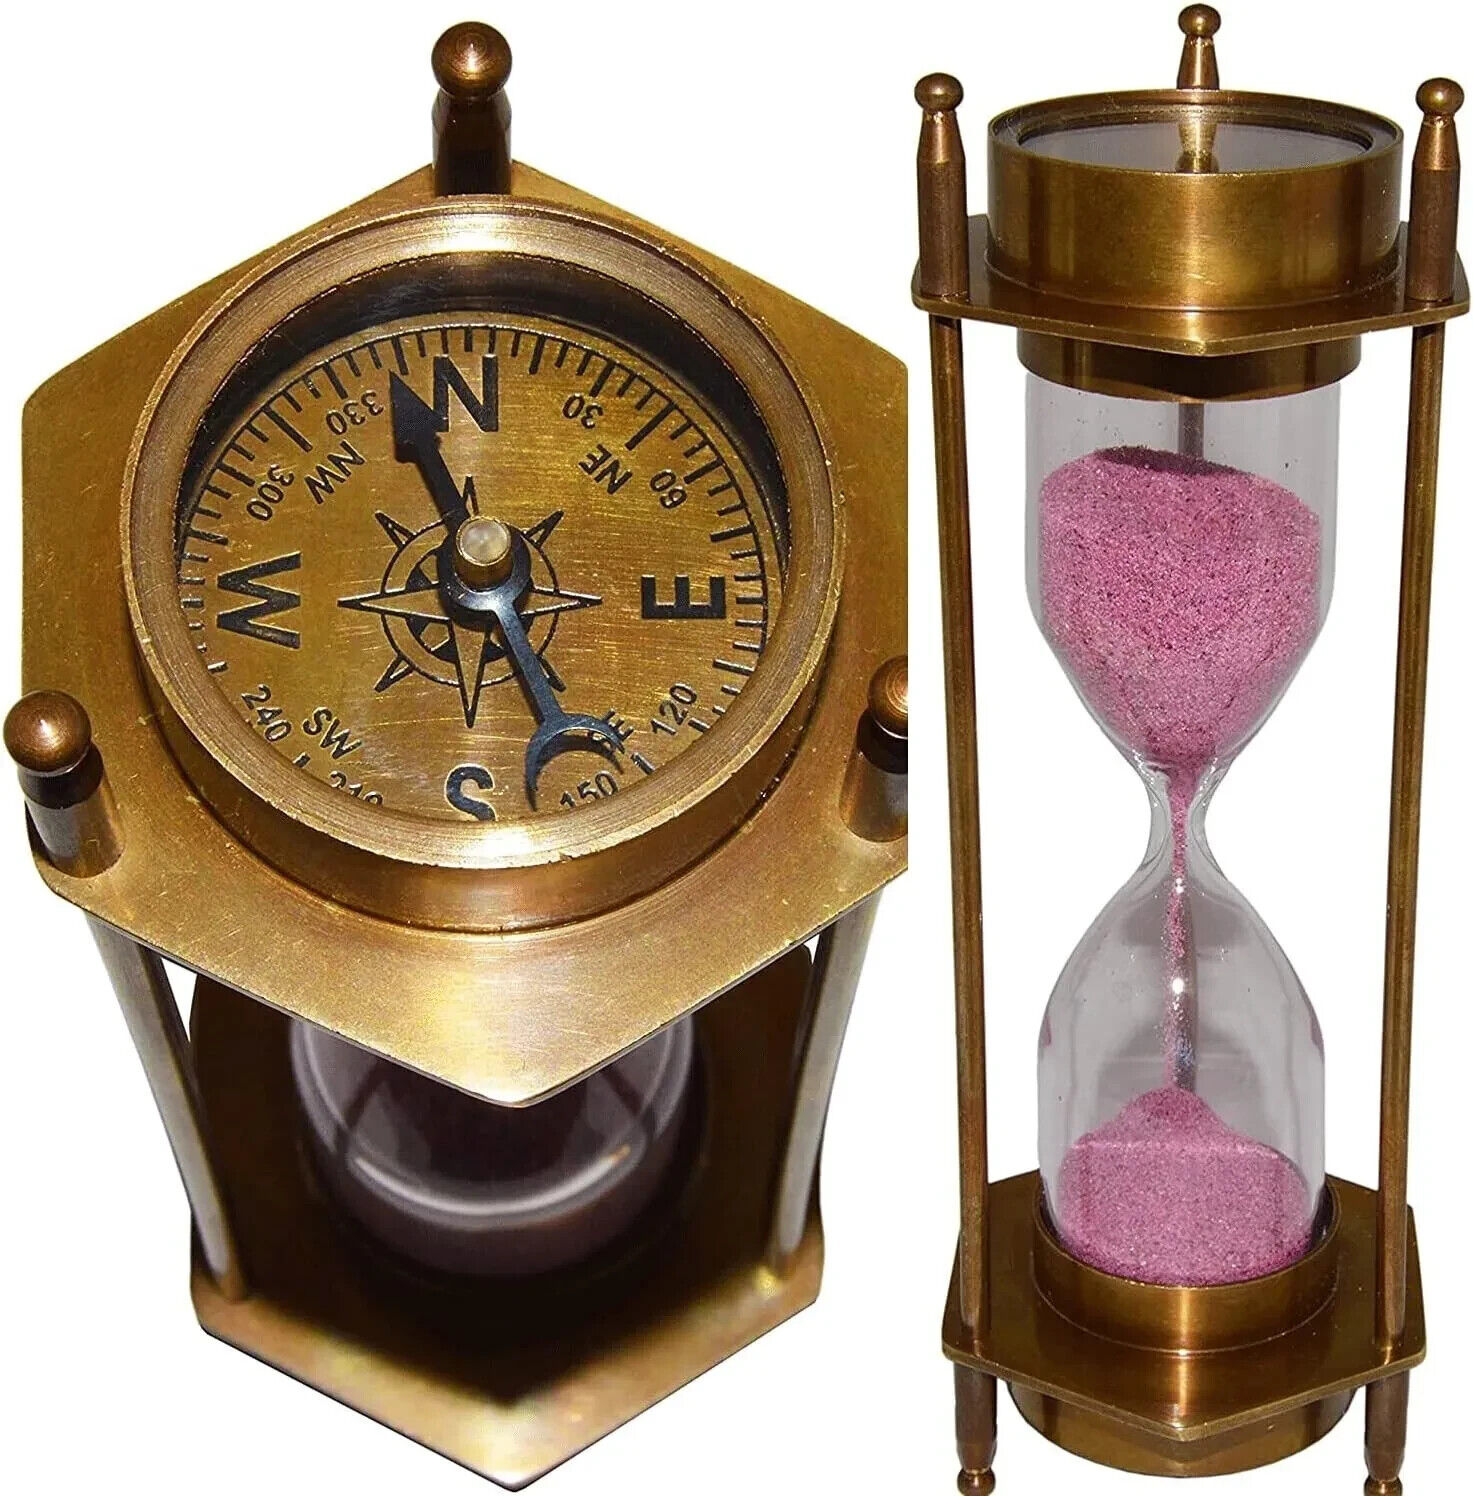 A Perfect Decorative Brass Sand Timer Hourglass with Exquisite Marine Compass